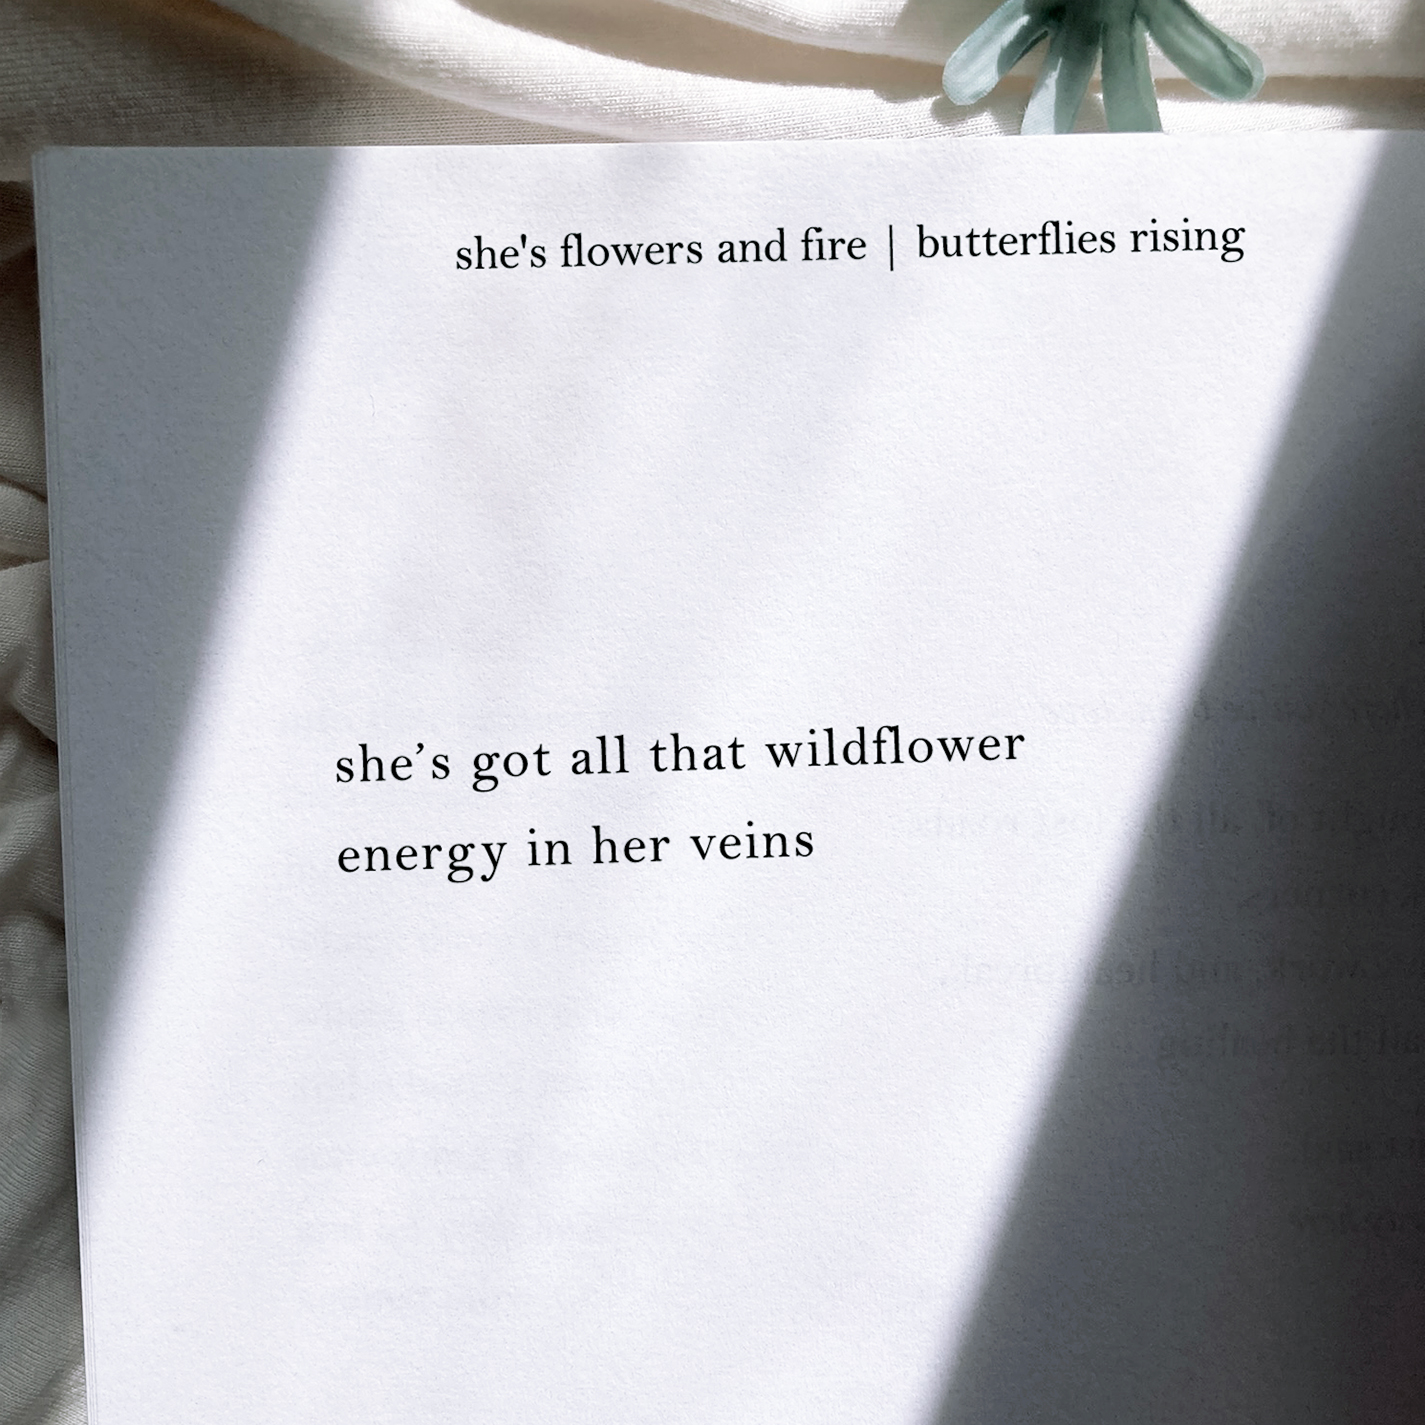 she’s got all that wildflower energy in her veins